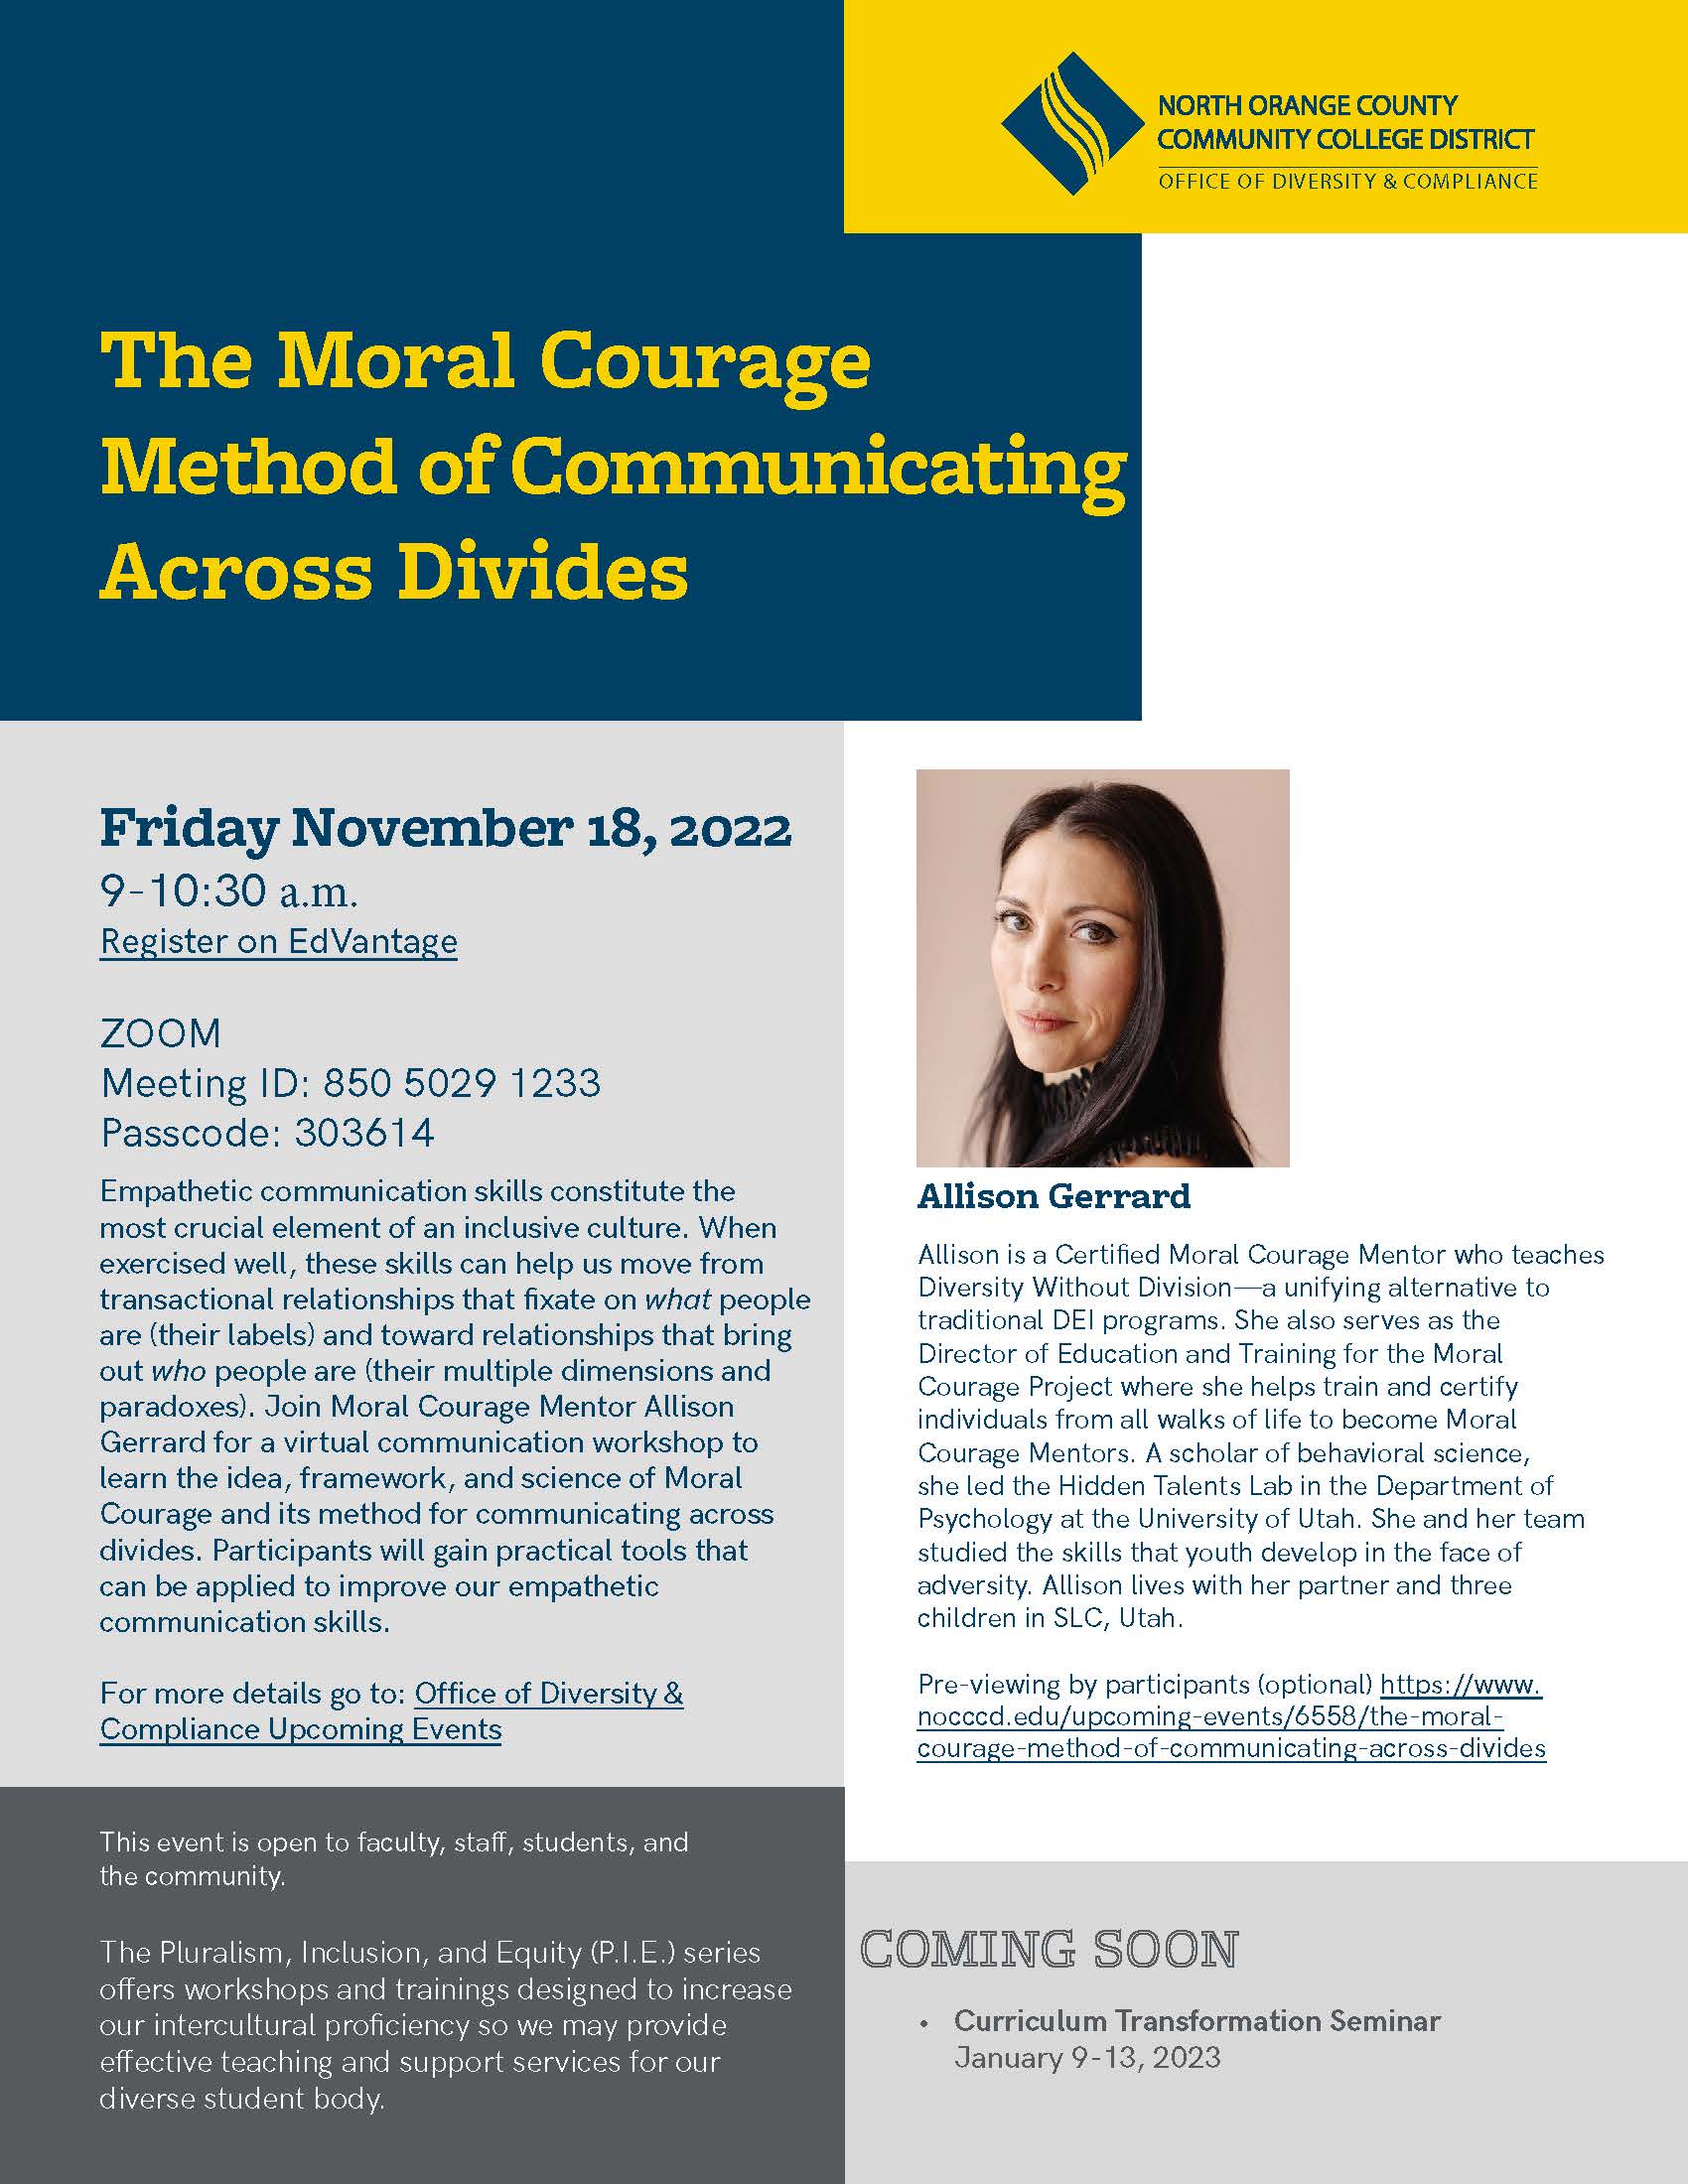 The Moral Courage Method of Communicating Across Divides - Cypress